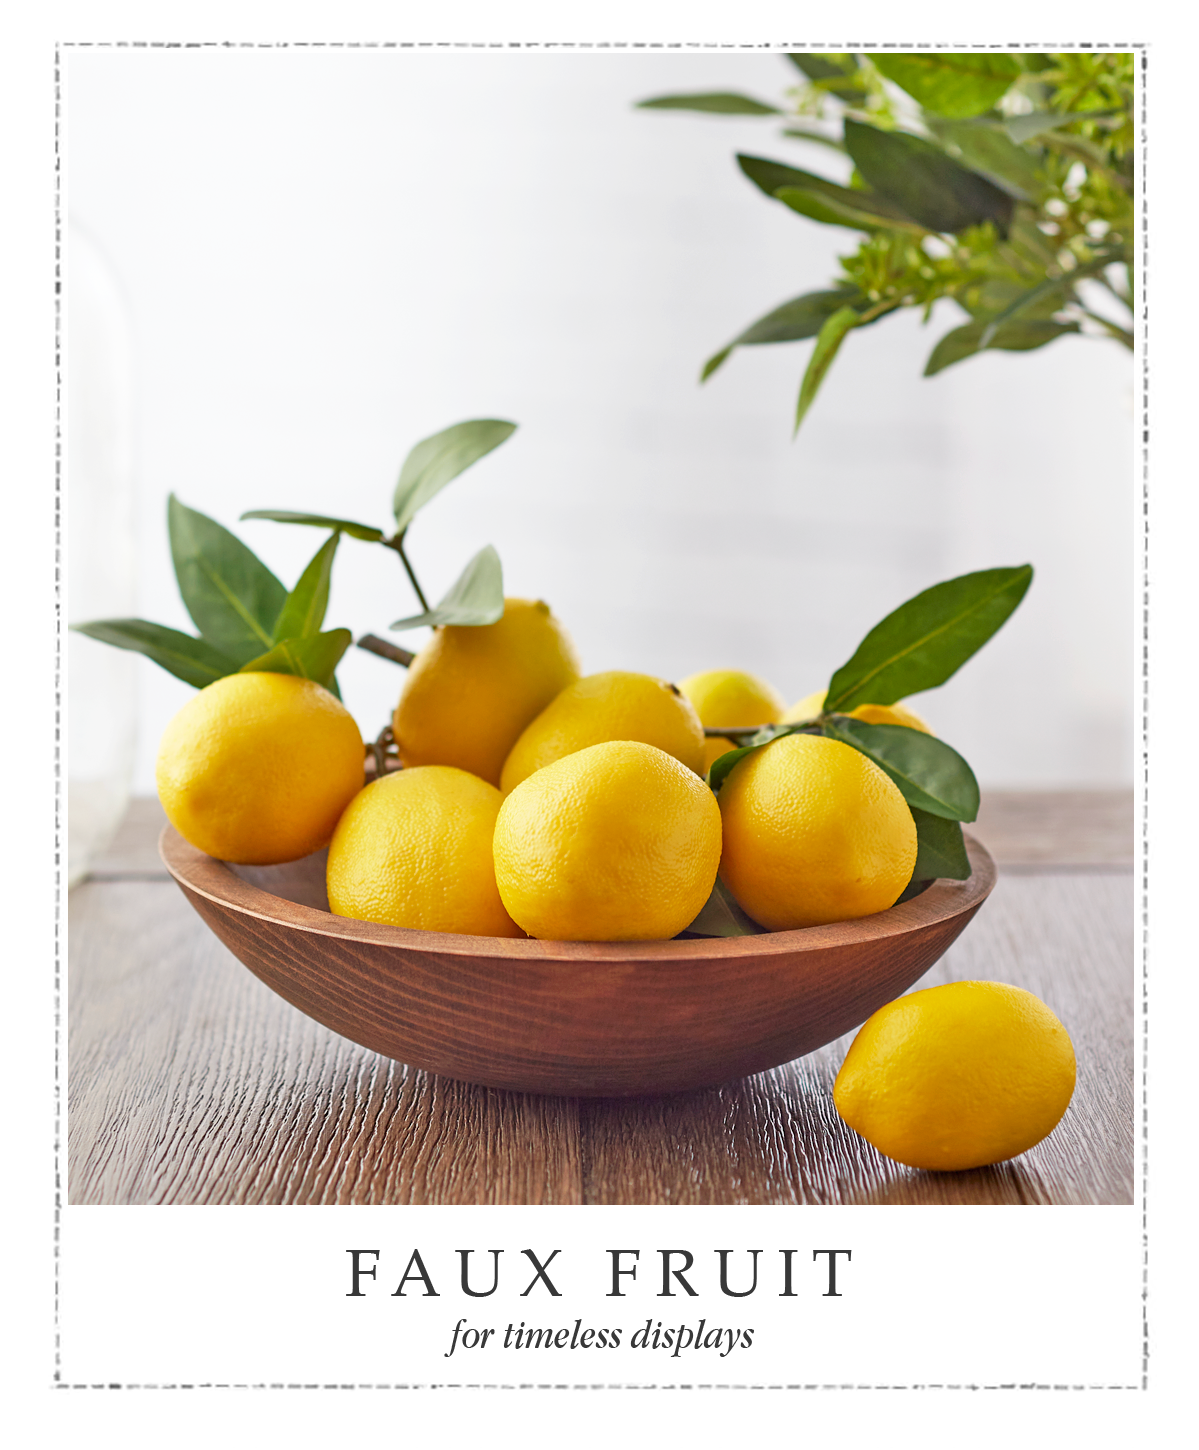 Faux Fruit for timeless displays